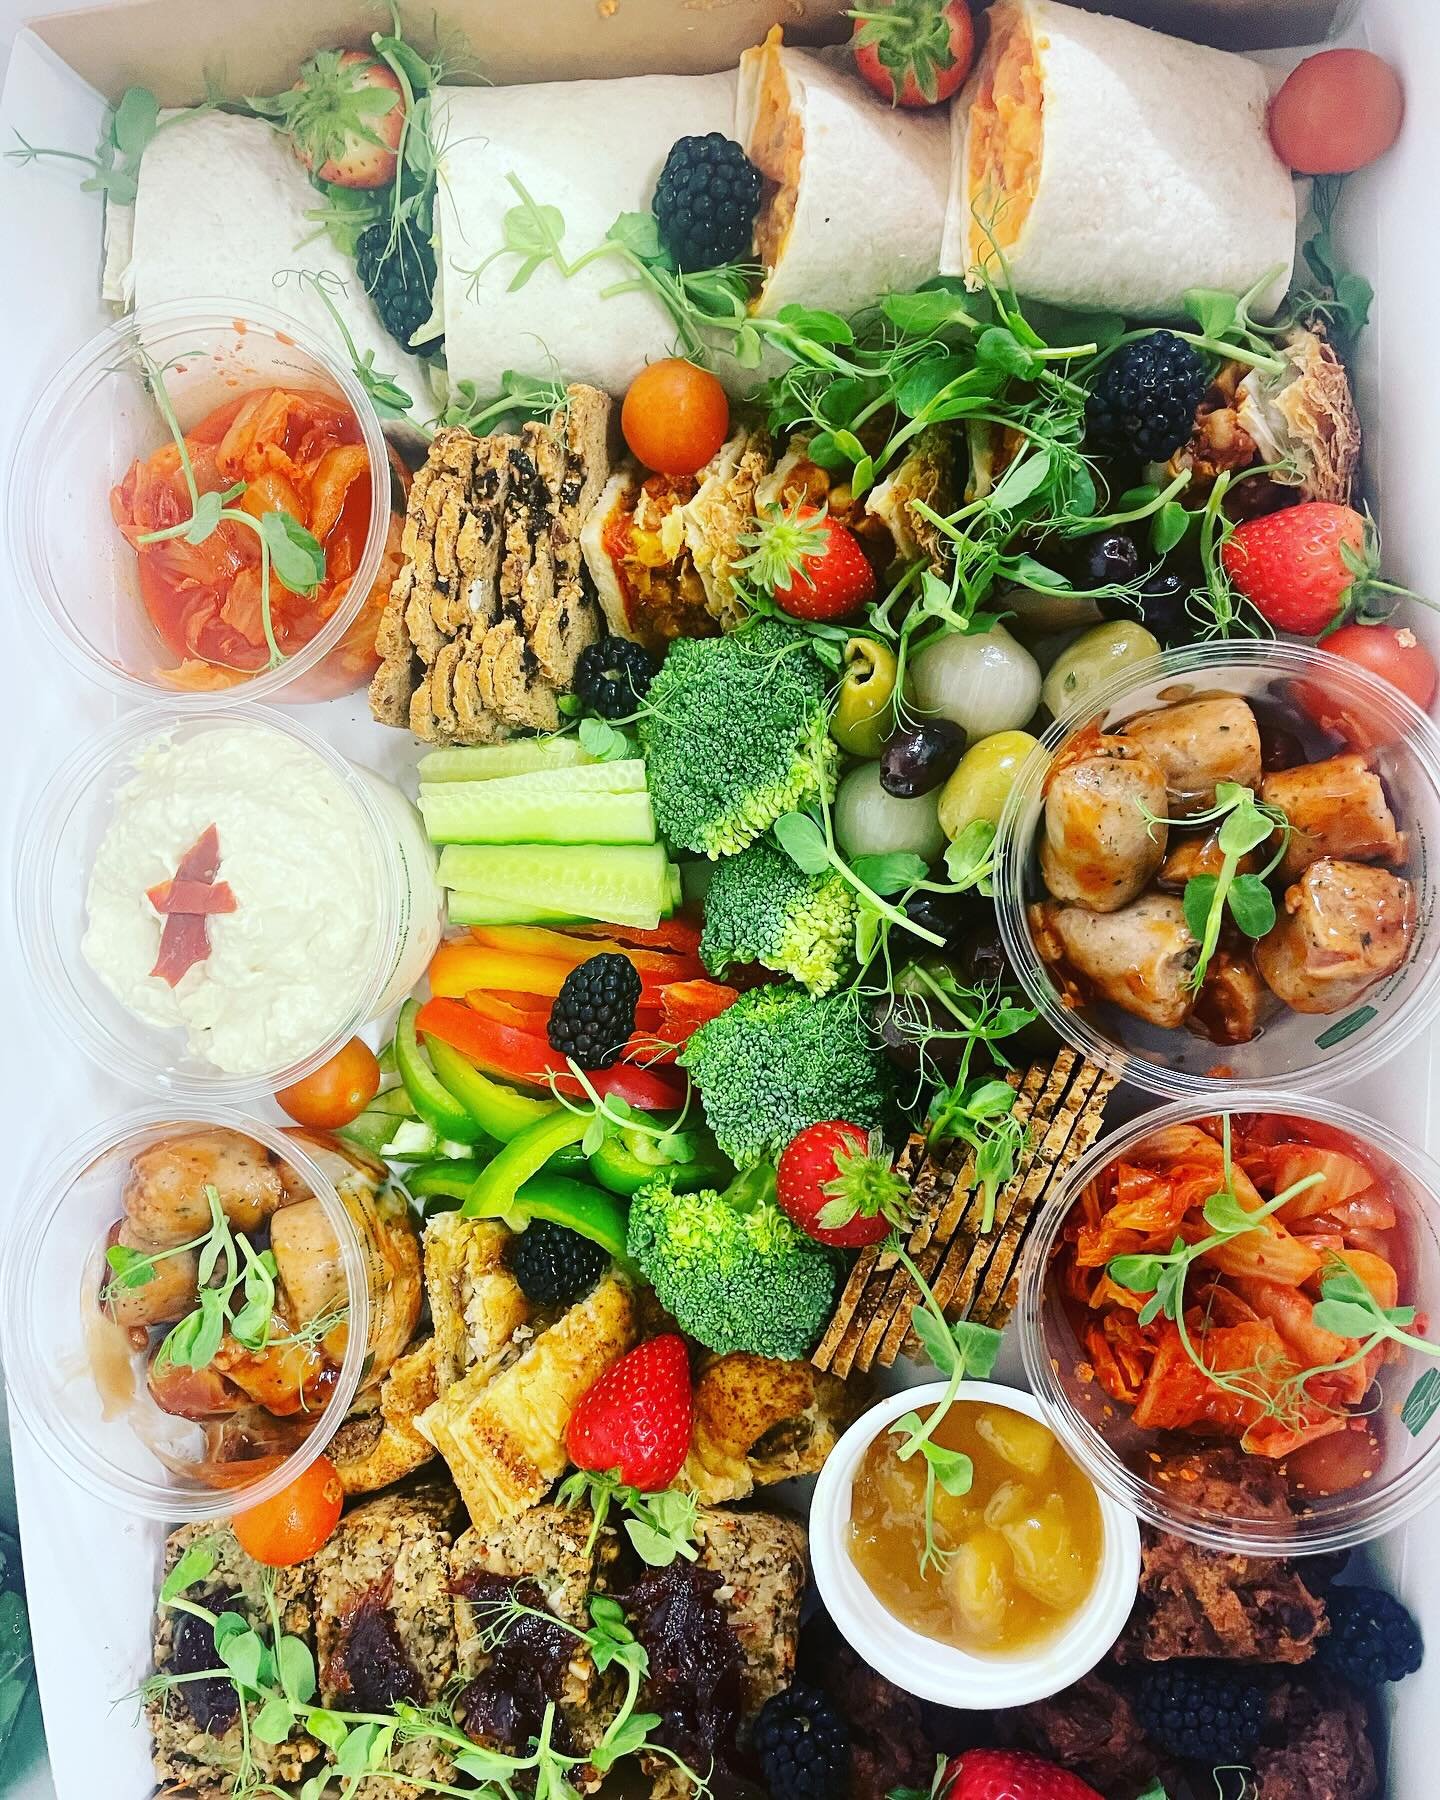 What&rsquo;s not to love about this 💯 vegan platter &hellip;. Requested by one of our corporate customers for their lunch today ! #vegan #veganplatter #corporatelunch